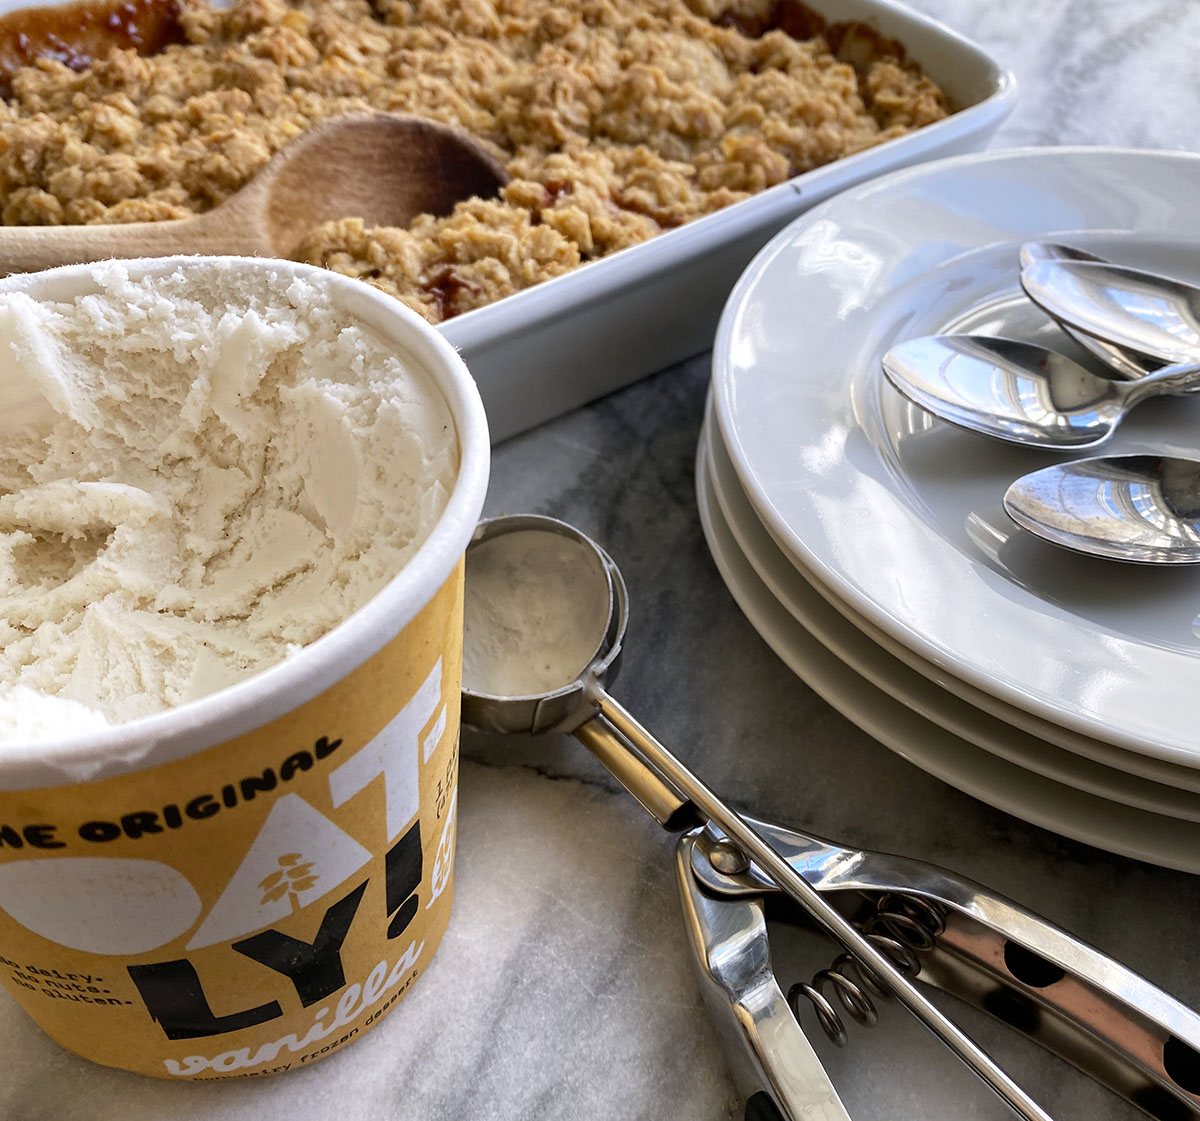 Open tub of vanilla Oat-ly ice cream, scoop, plates, and baking dish of apple crumble on marble counter. 